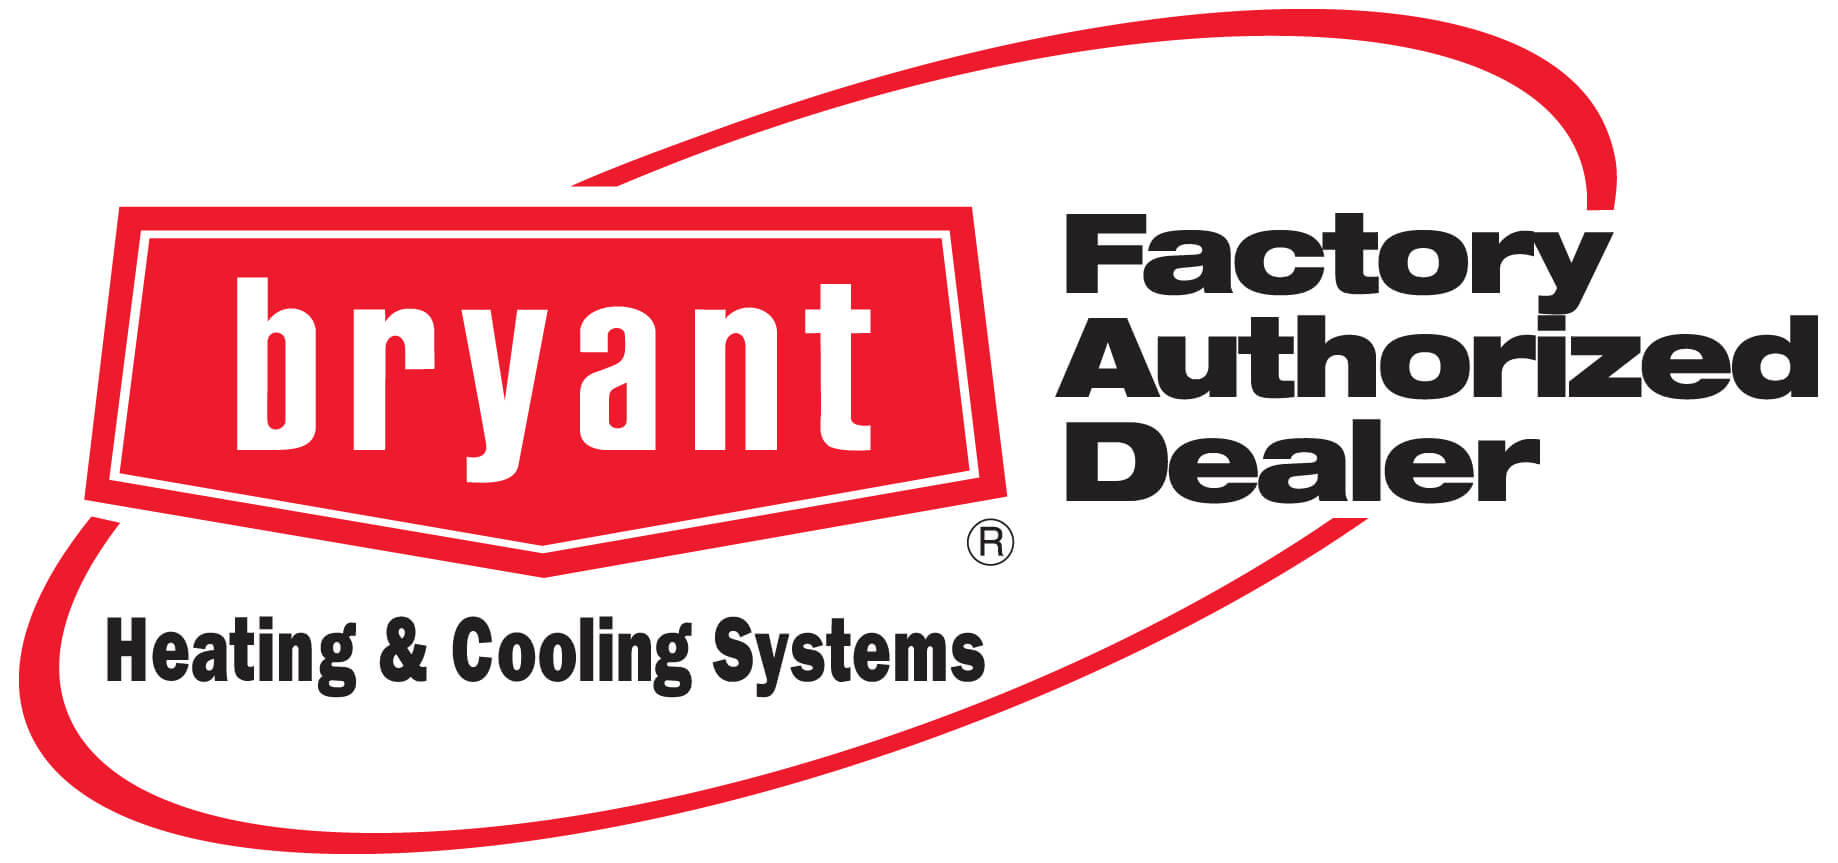 BRG Air Systems LLC works with Bryant Heating and Cooling Systems Furnaces in Palm Bay FL.